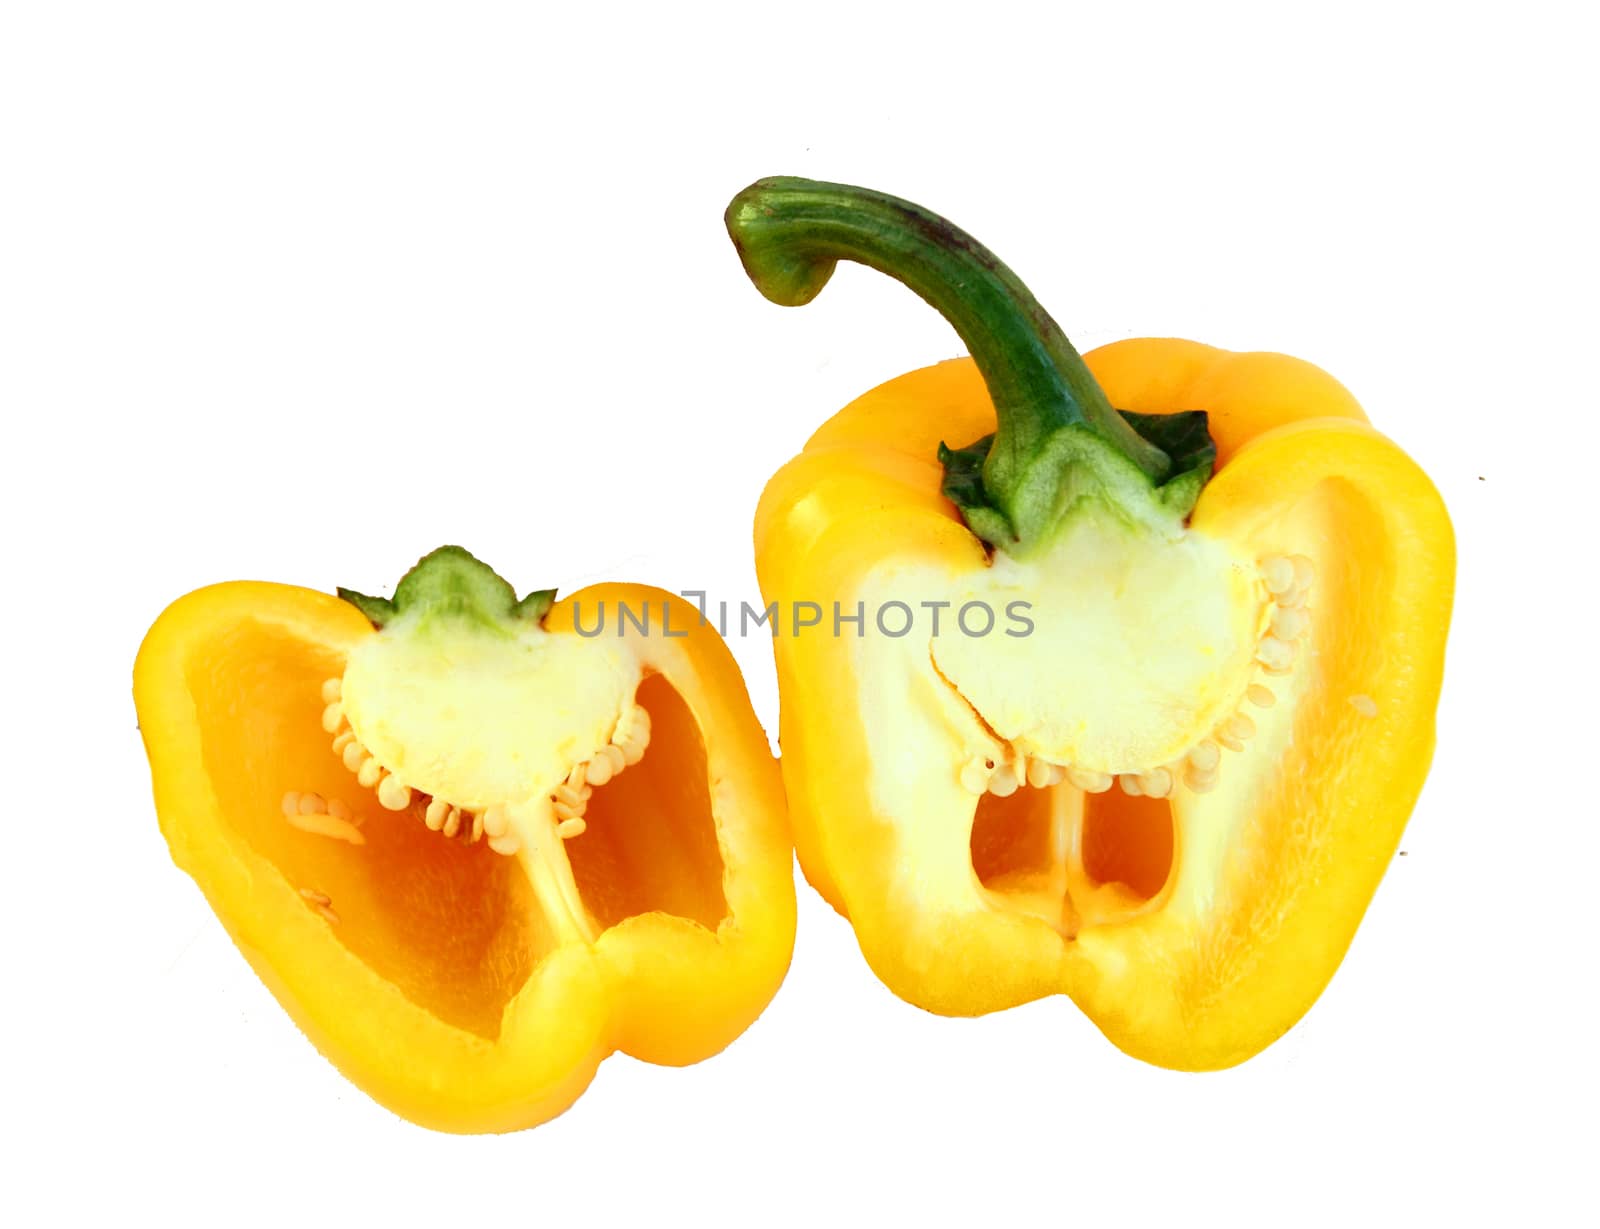 Bulgarian yellow pepper on white background is insulated